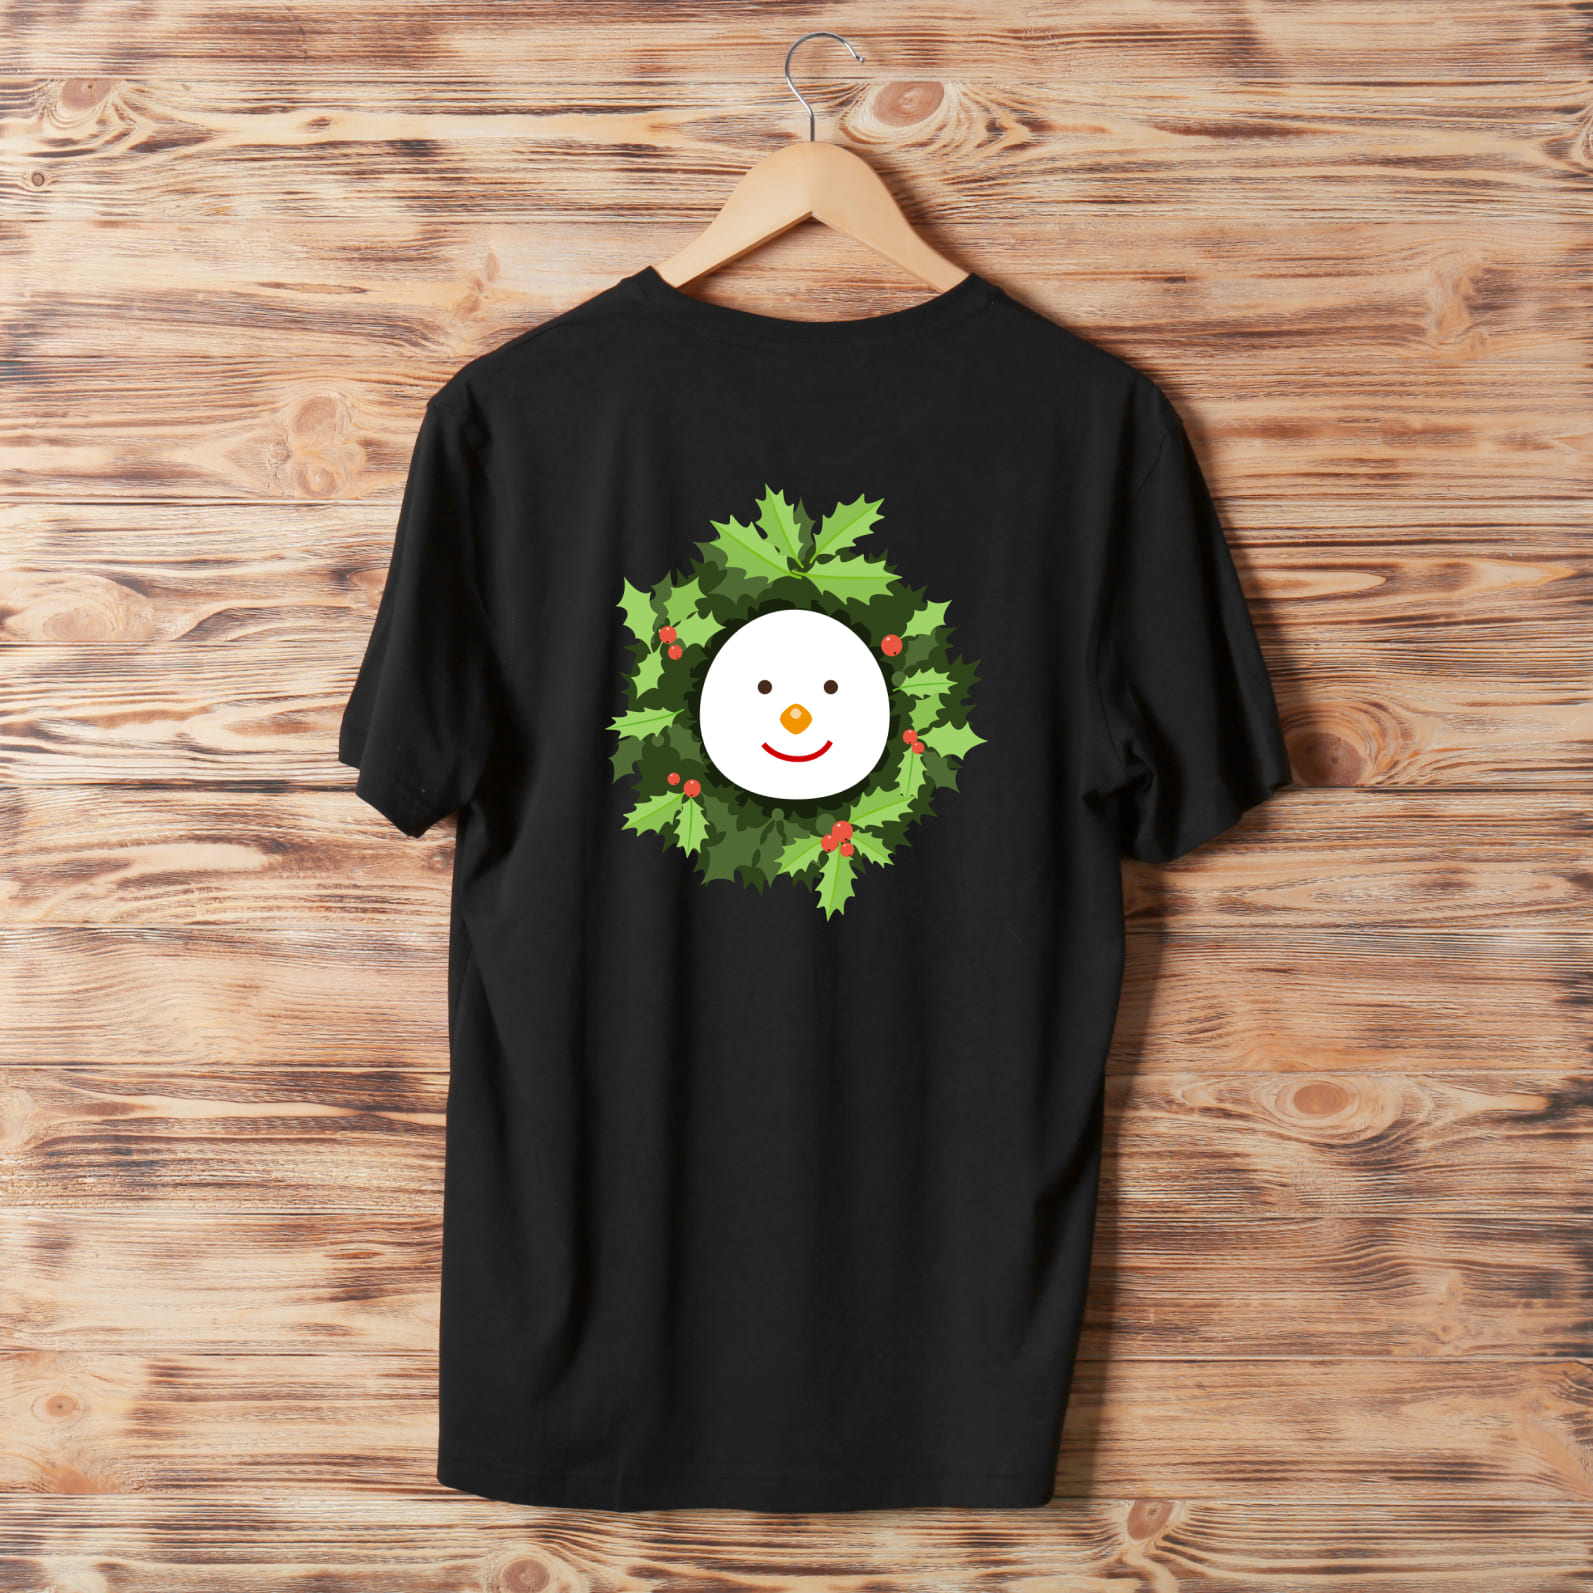 Oversize black t-shirt with the cute snowman face.